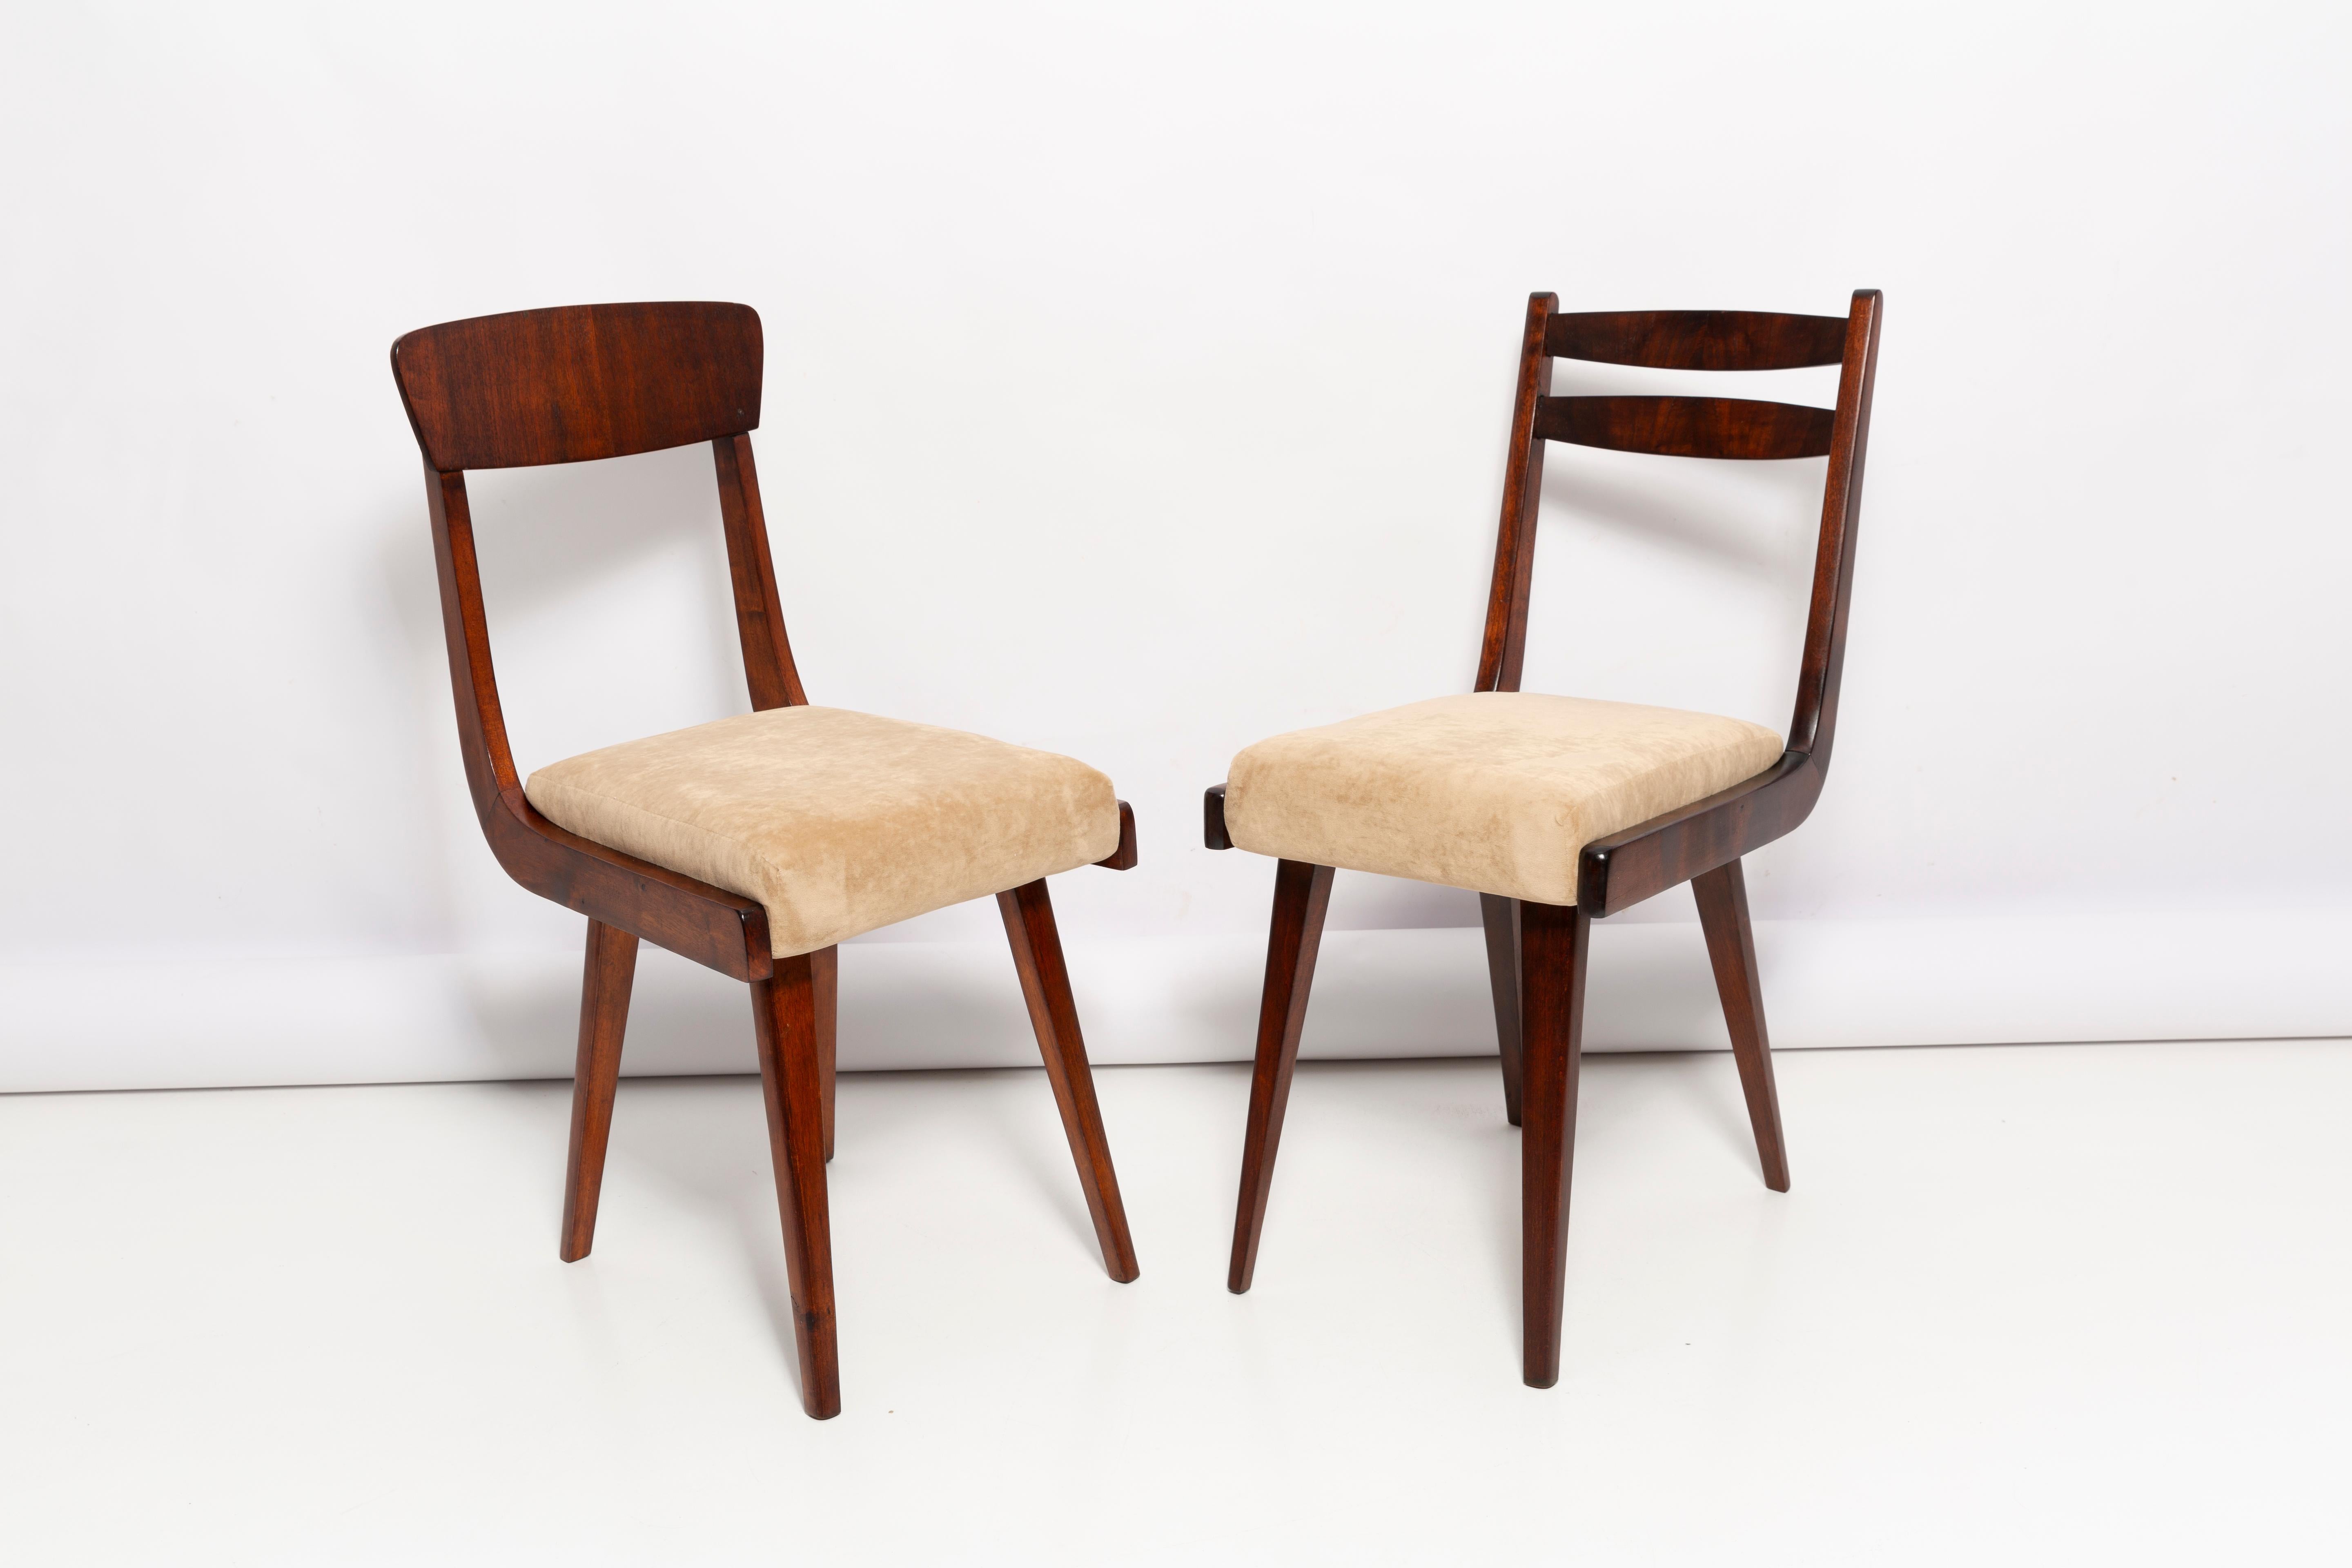 Set of Four Mid Century Gazelle Beige Wood Chairs, Europe, 1960s For Sale 1